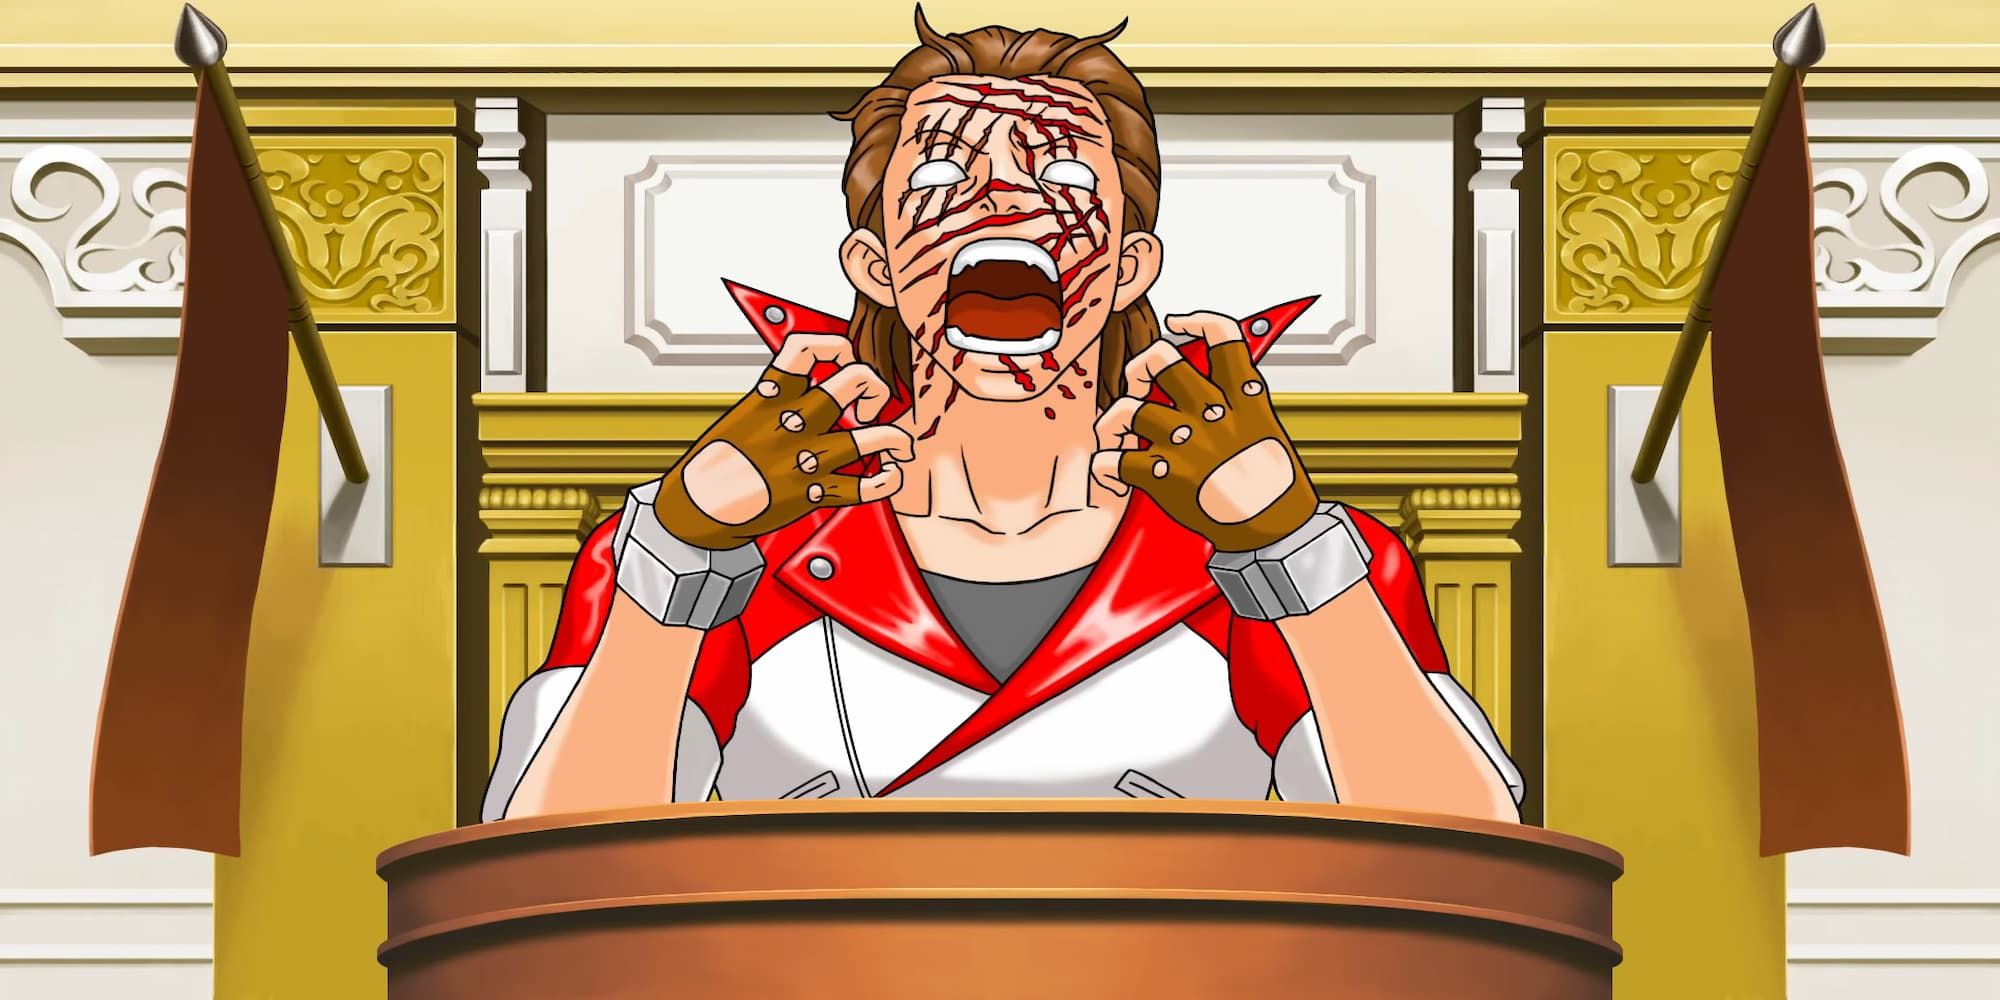 Ace Attorney Engarde breakdown at witness stand in court wearing red and white jacket hands scratching at face with red lines covering face and screaming